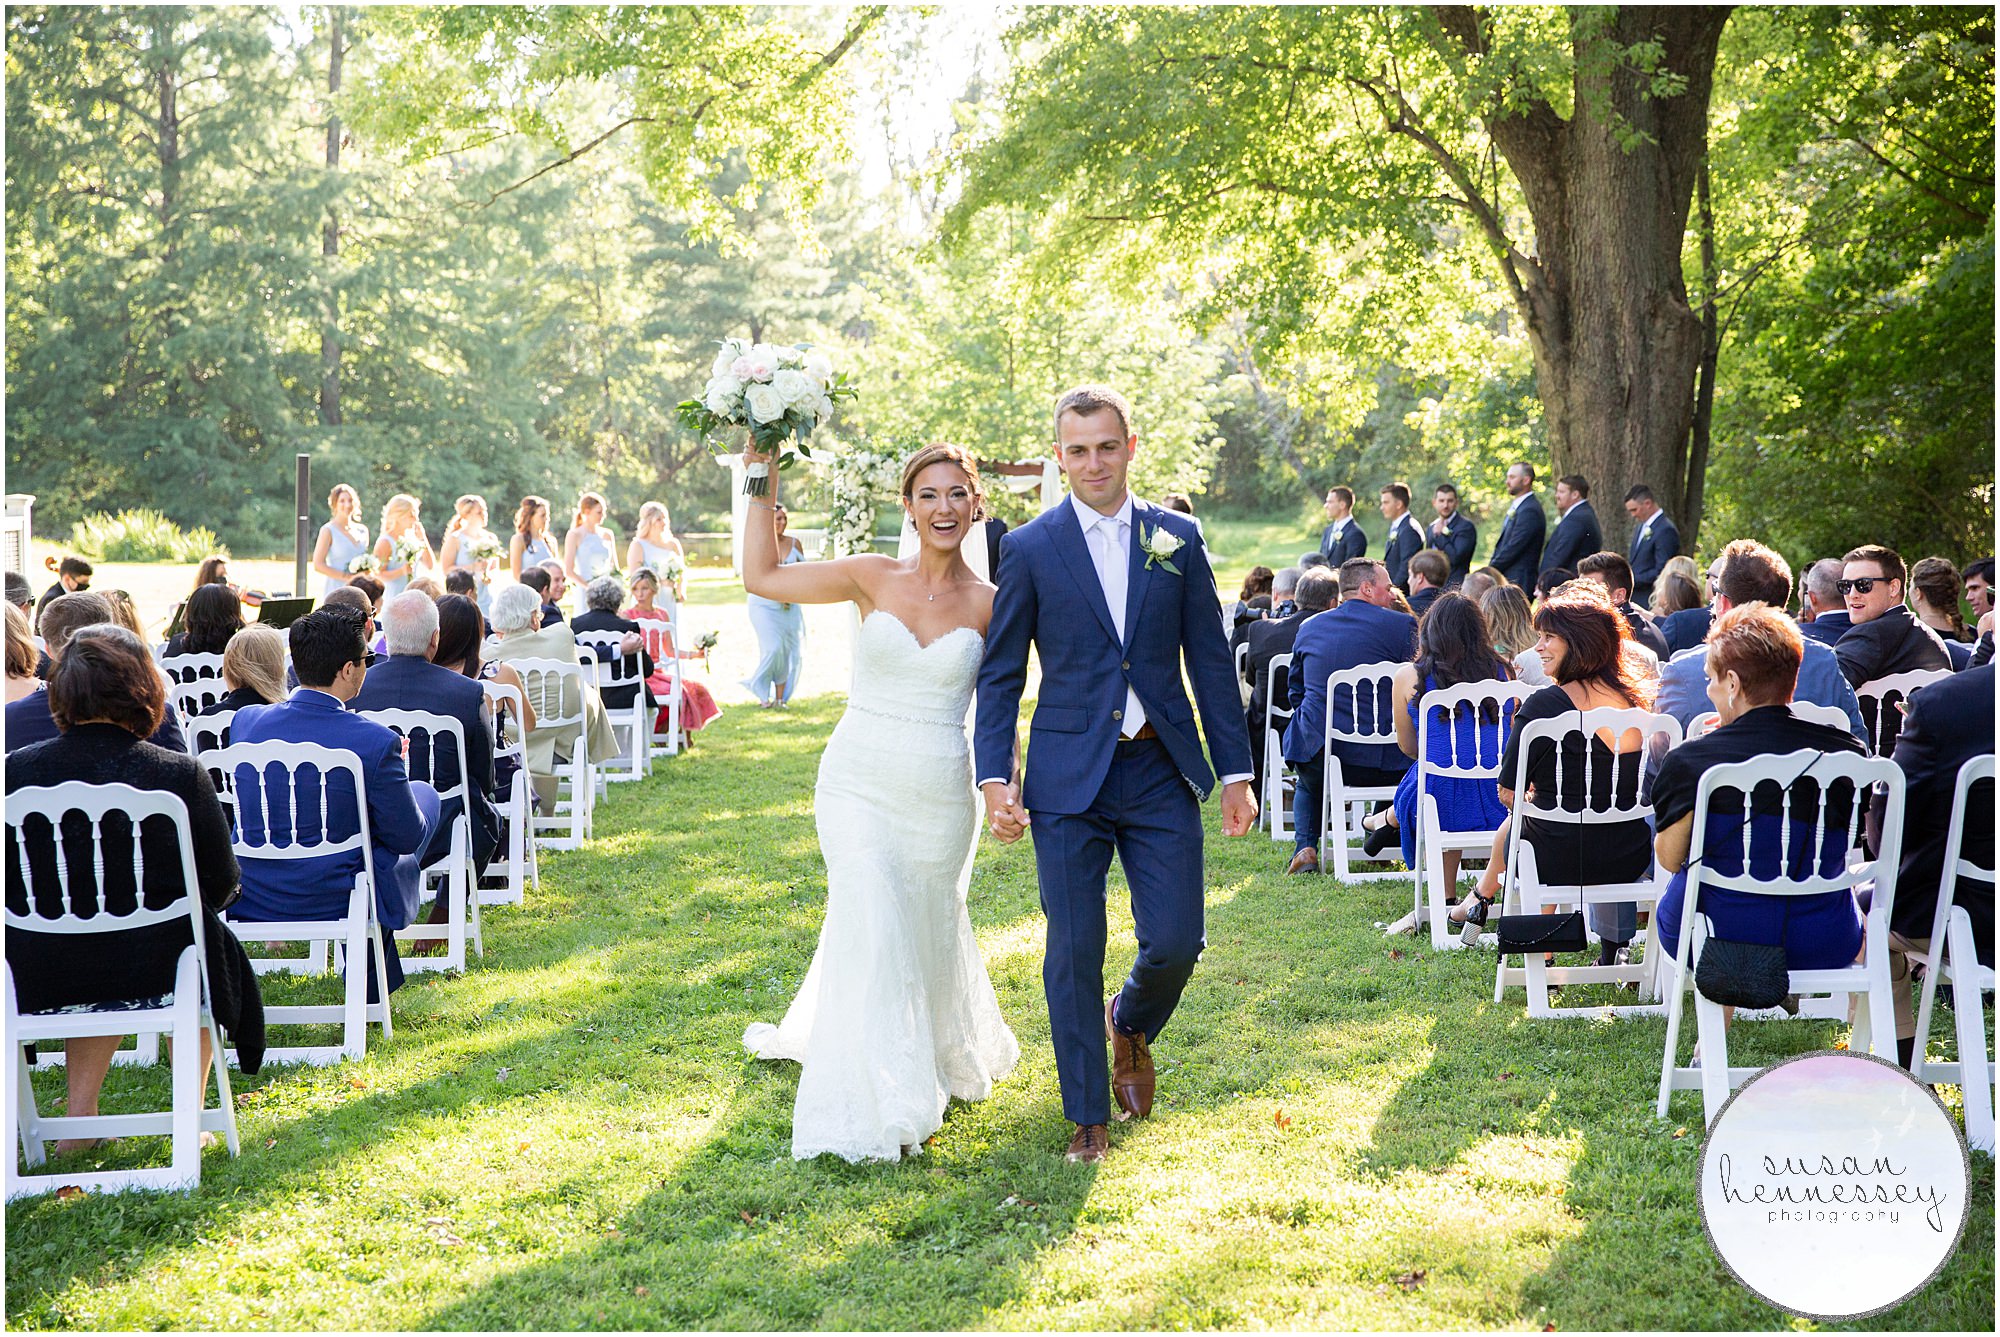 Susan Hennessey Photography Best of 2020 Weddings - Ceremony at Inn at Barley Sheaf wedding